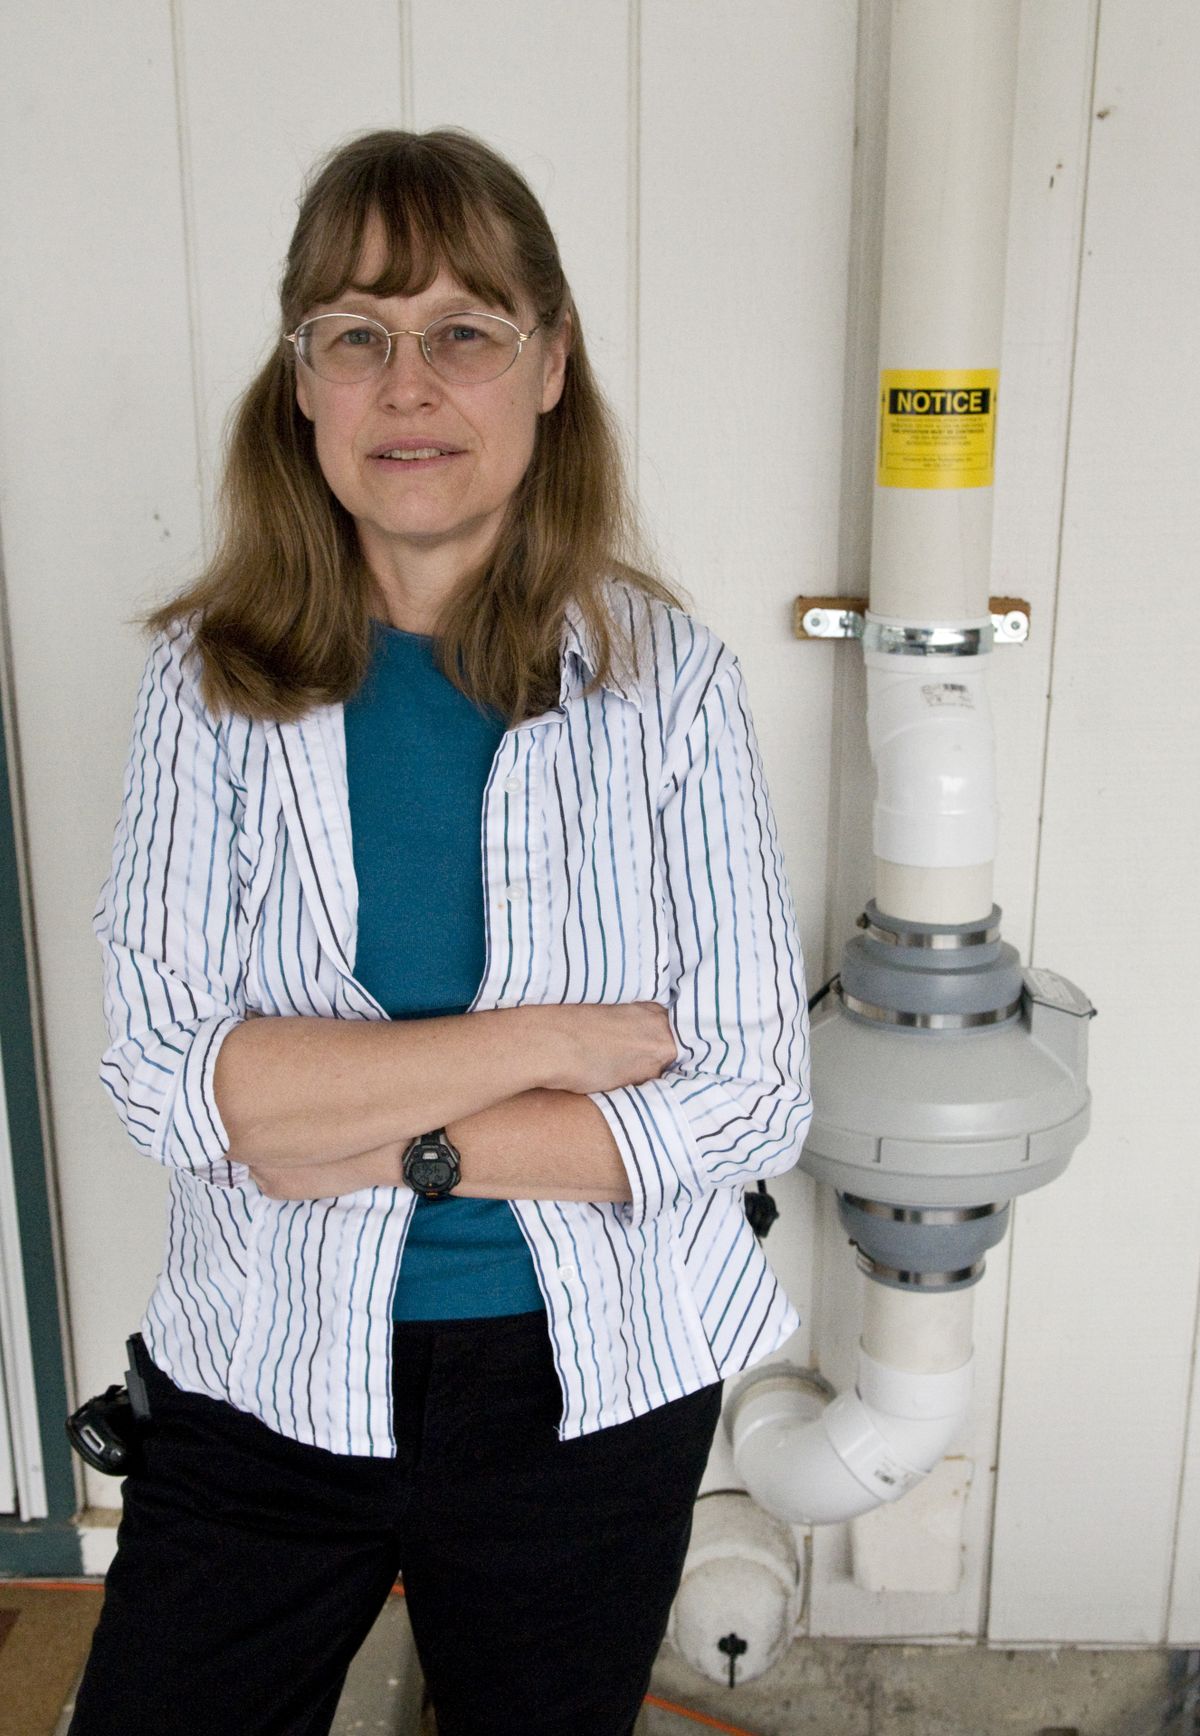 Debbie Greenman’s parents  had a radon mitigation system installed in their Deer Park home to lower radon gas in the house to safe levels.  (Colin Mulvany / The Spokesman-Review)